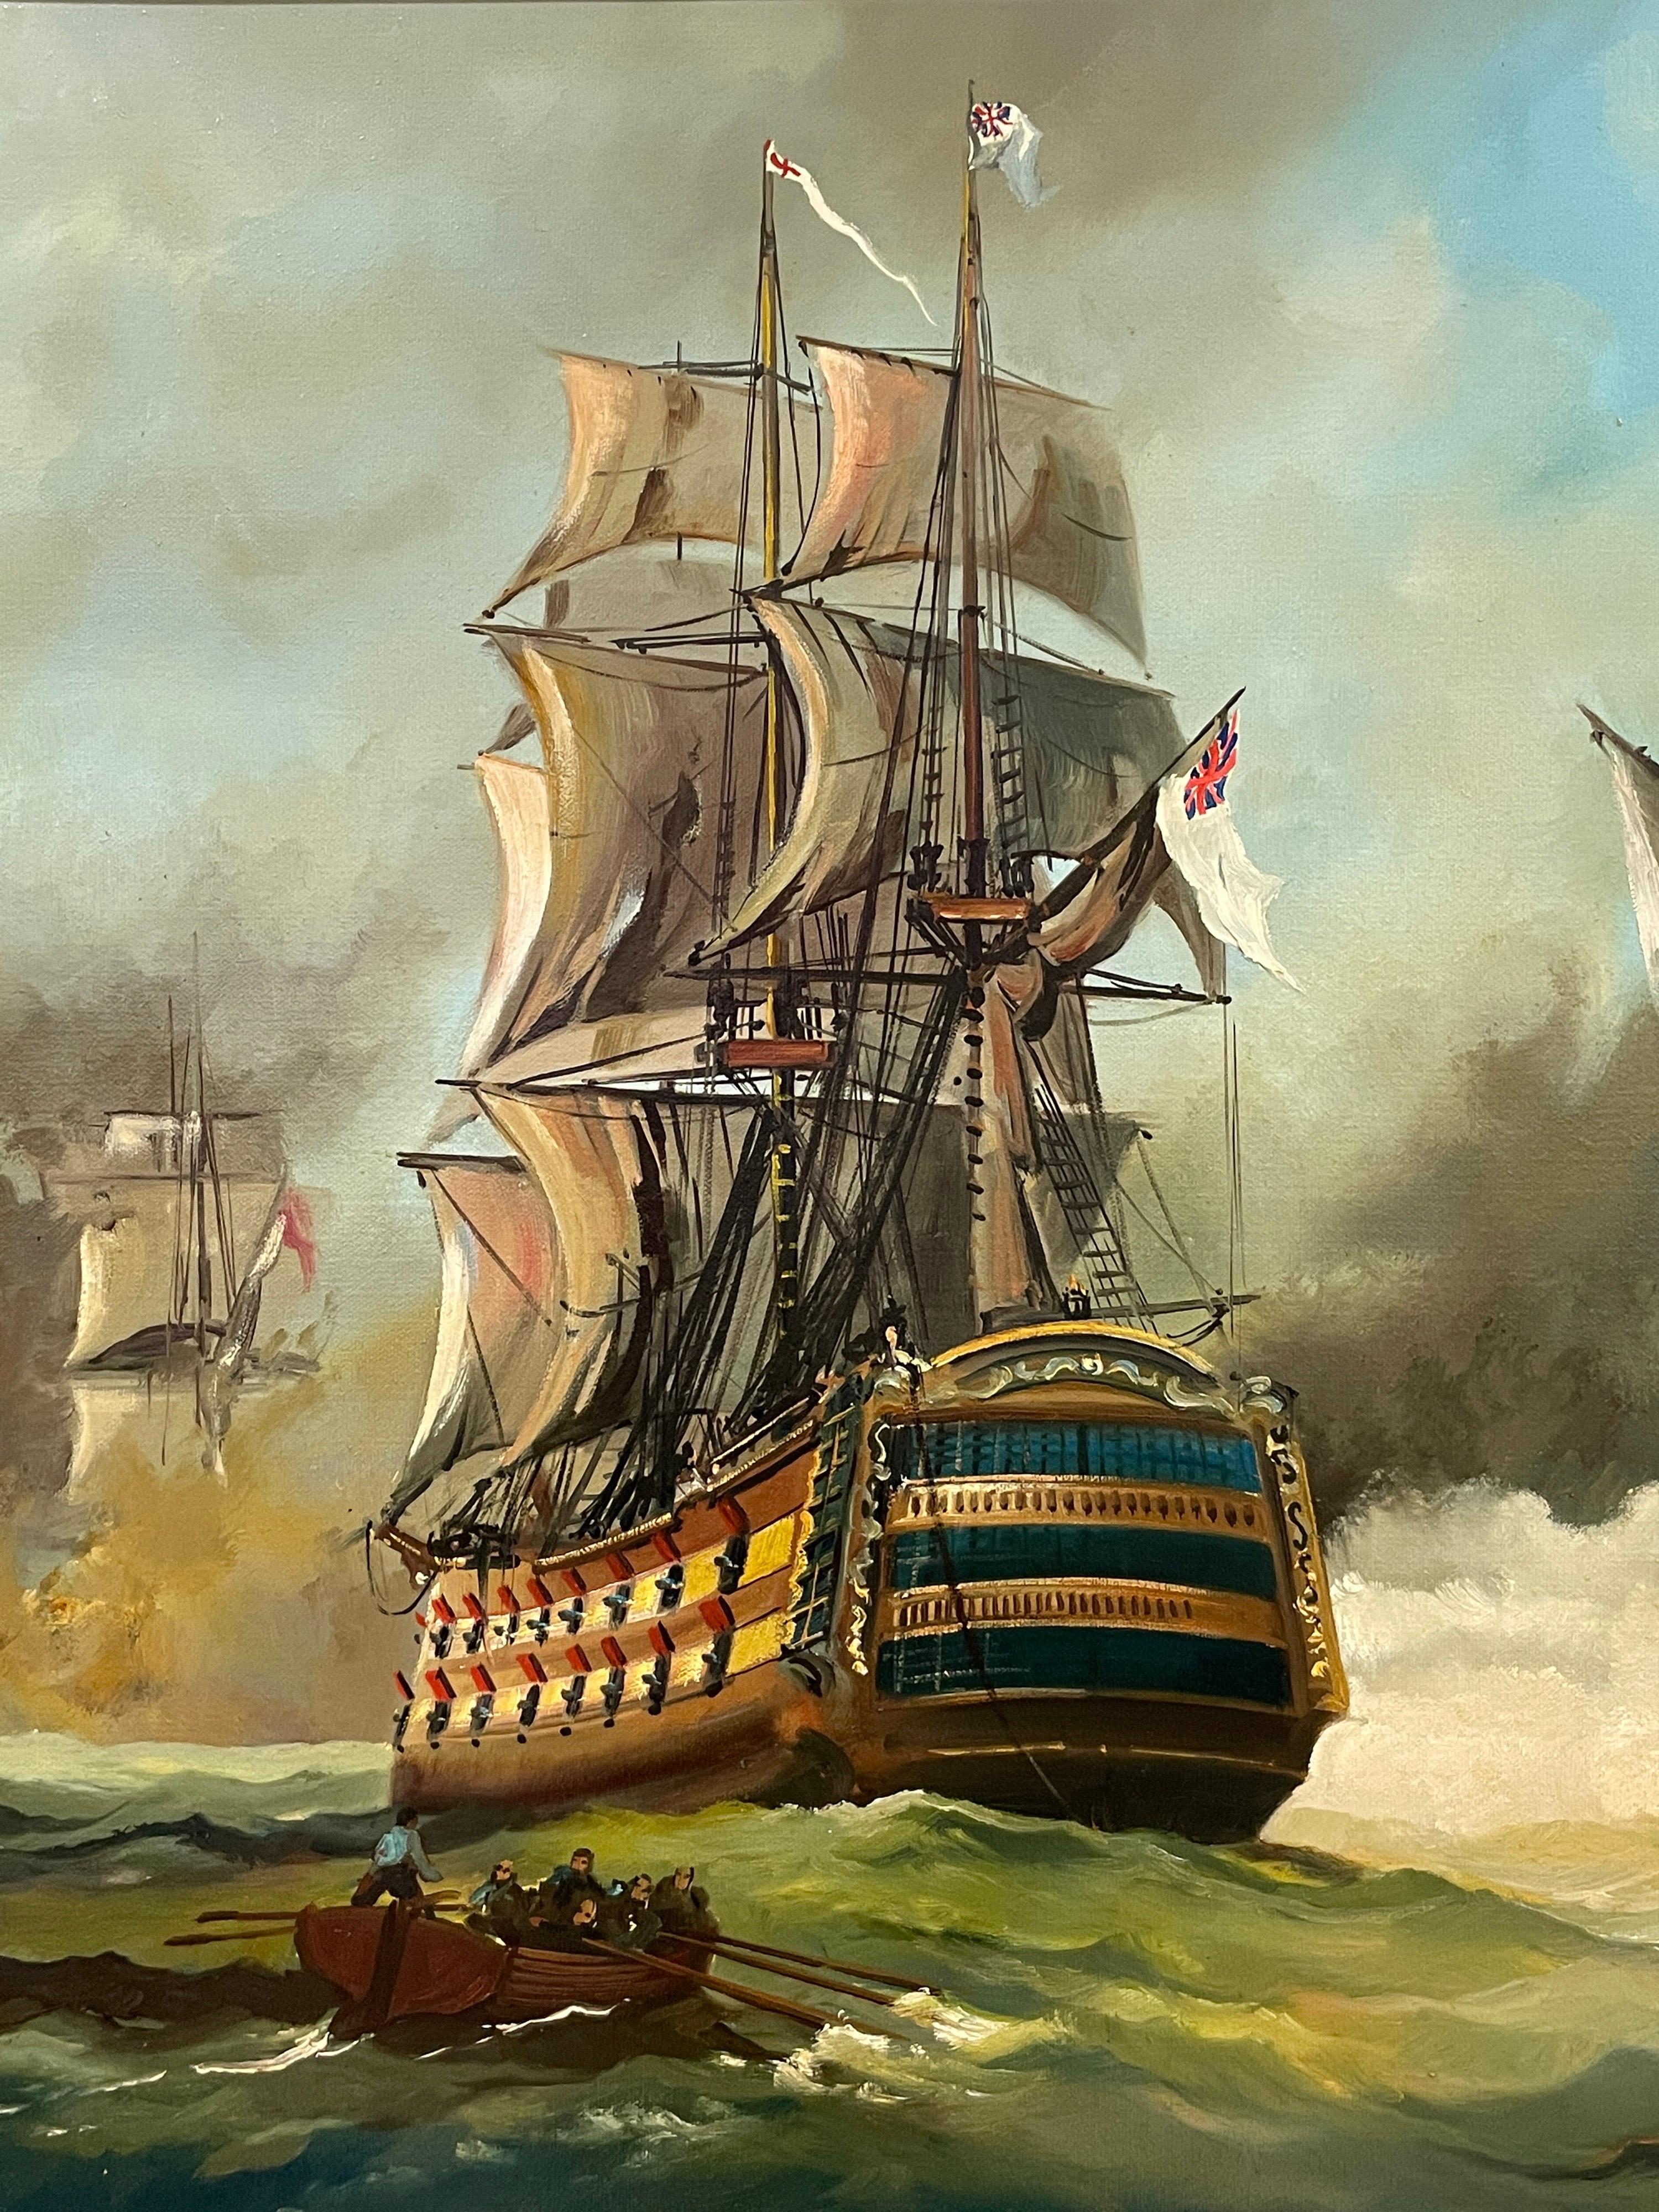 The Battle of Trafalgar
by Dion Pears (British 1929-1985)
signed & dated, lower left
oil painting on canvas, framed

framed measurements: 33 x 40 inches

Dramatic and impressive original oil painting by the well listed British marine artist, Dion